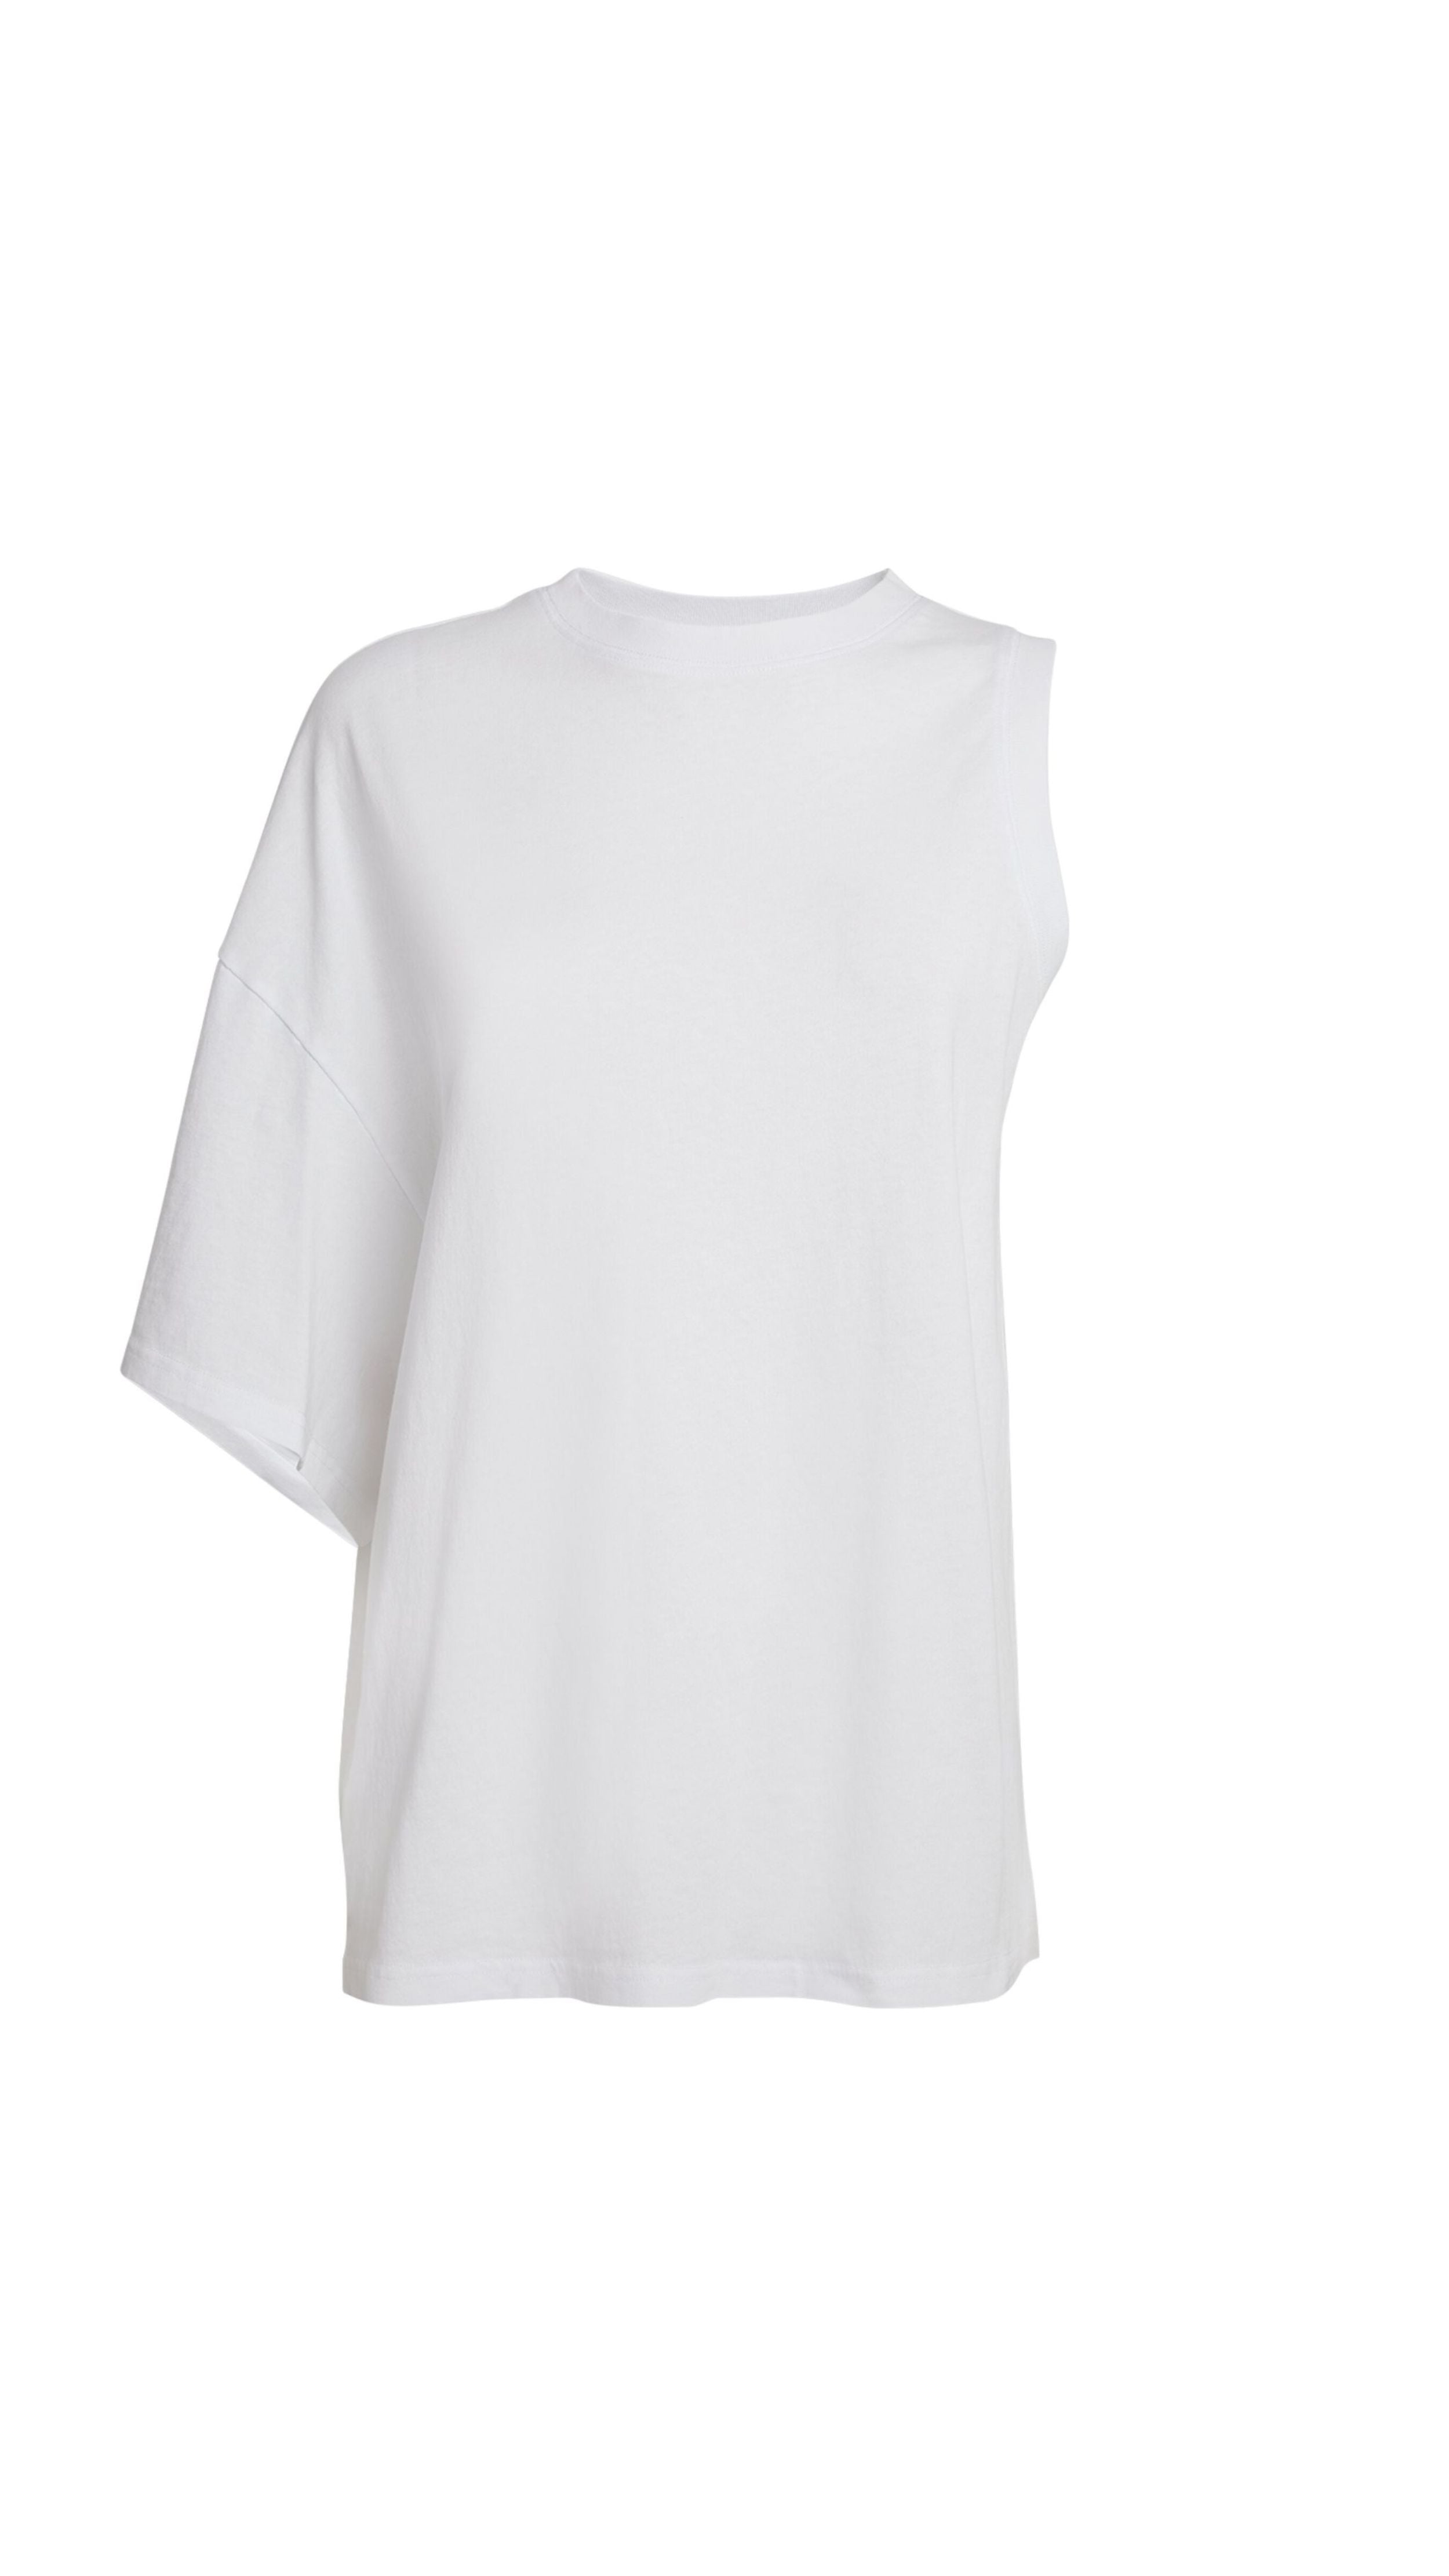 A.W.A.K.E. Mode Asymmetrical One Sleeve T-Shirt in white cotton. Sleeveless on one side and with an exaggerated sleeve on the other. Rounded t-shirt neckline that is slightly off the shoulder. The waist is fitted so the shirt drapes beautifully. 